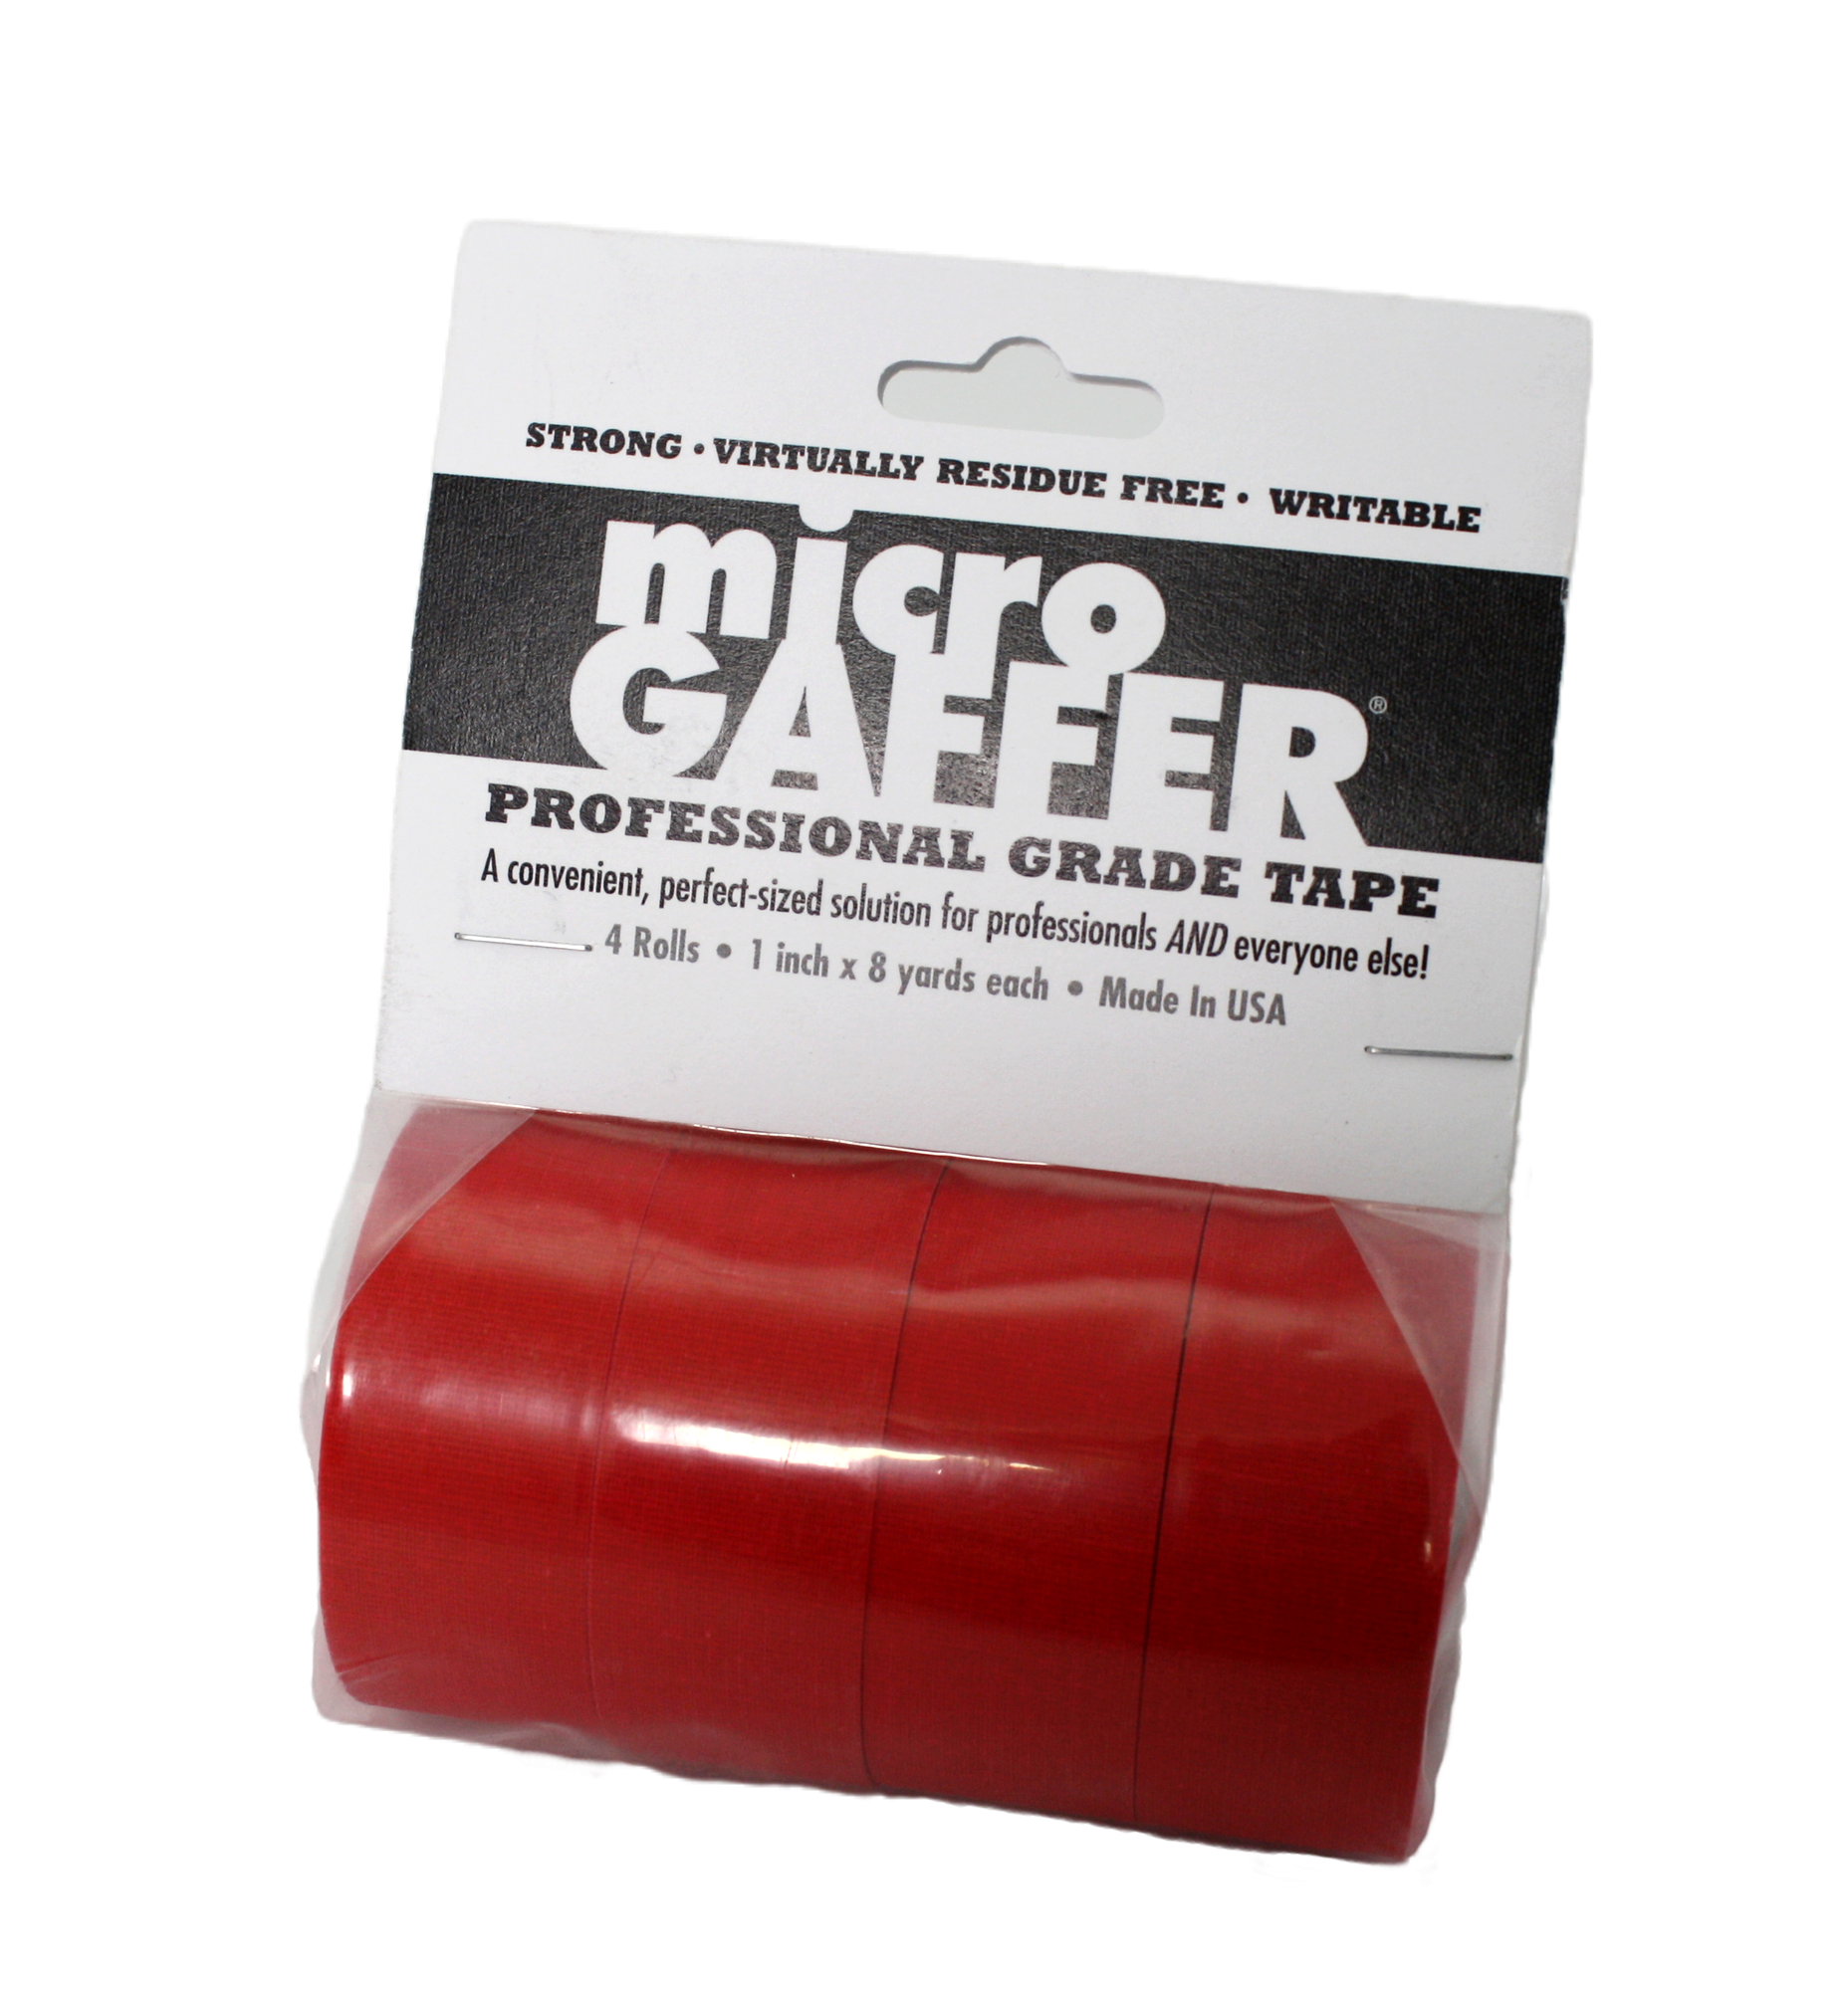 Micro Gaffer 4 Pack in red